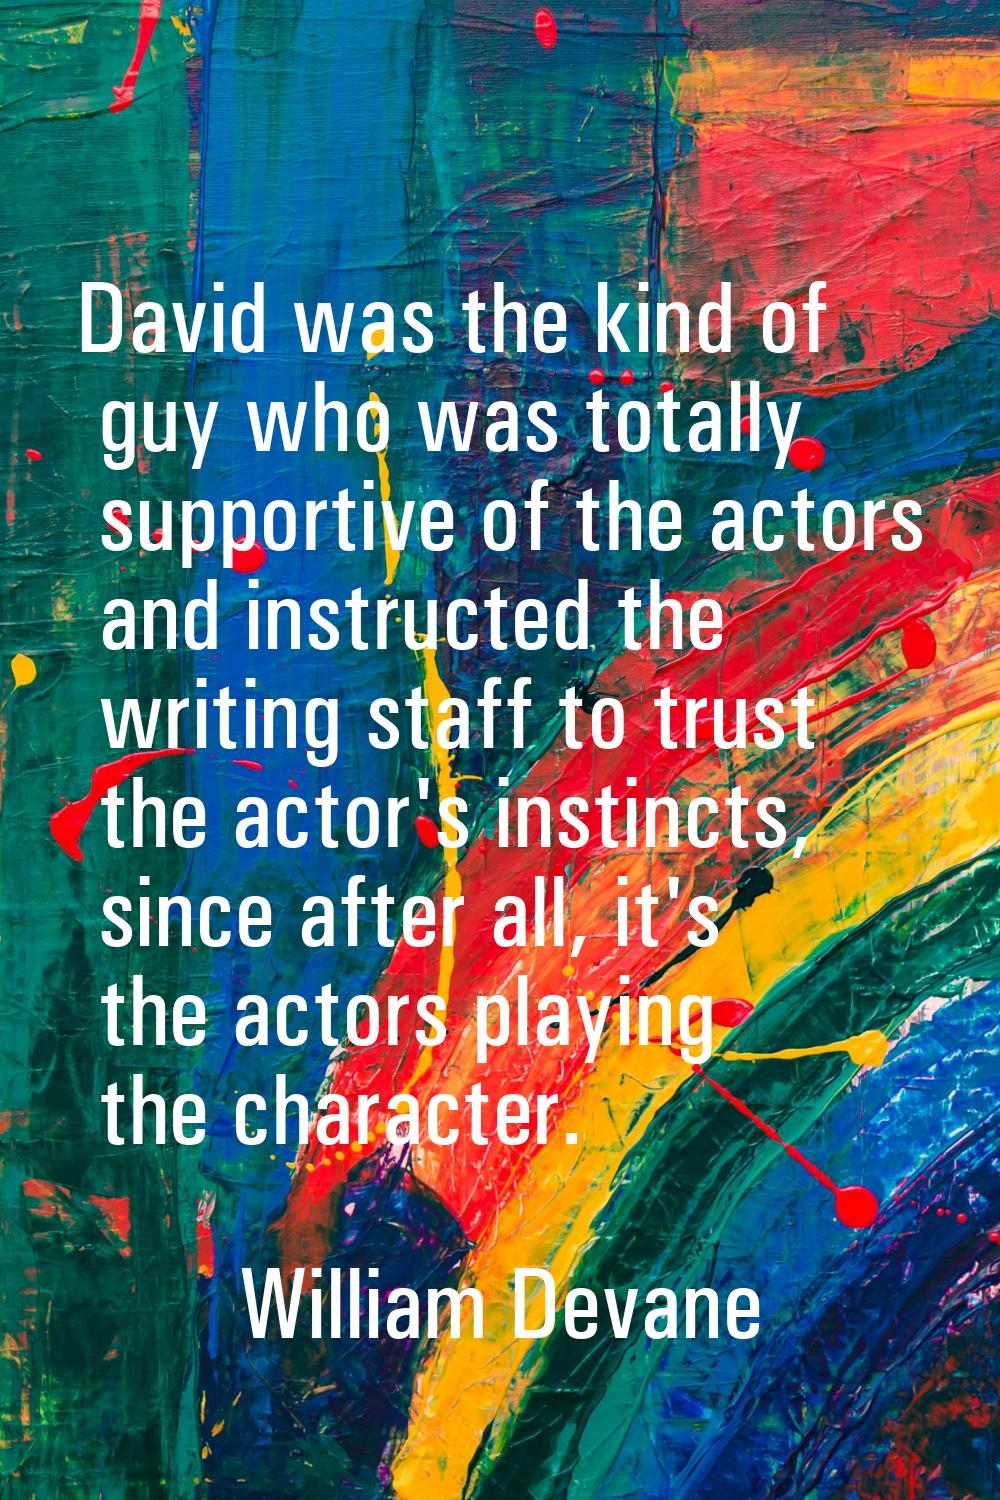 David was the kind of guy who was totally supportive of the actors and instructed the writing staff